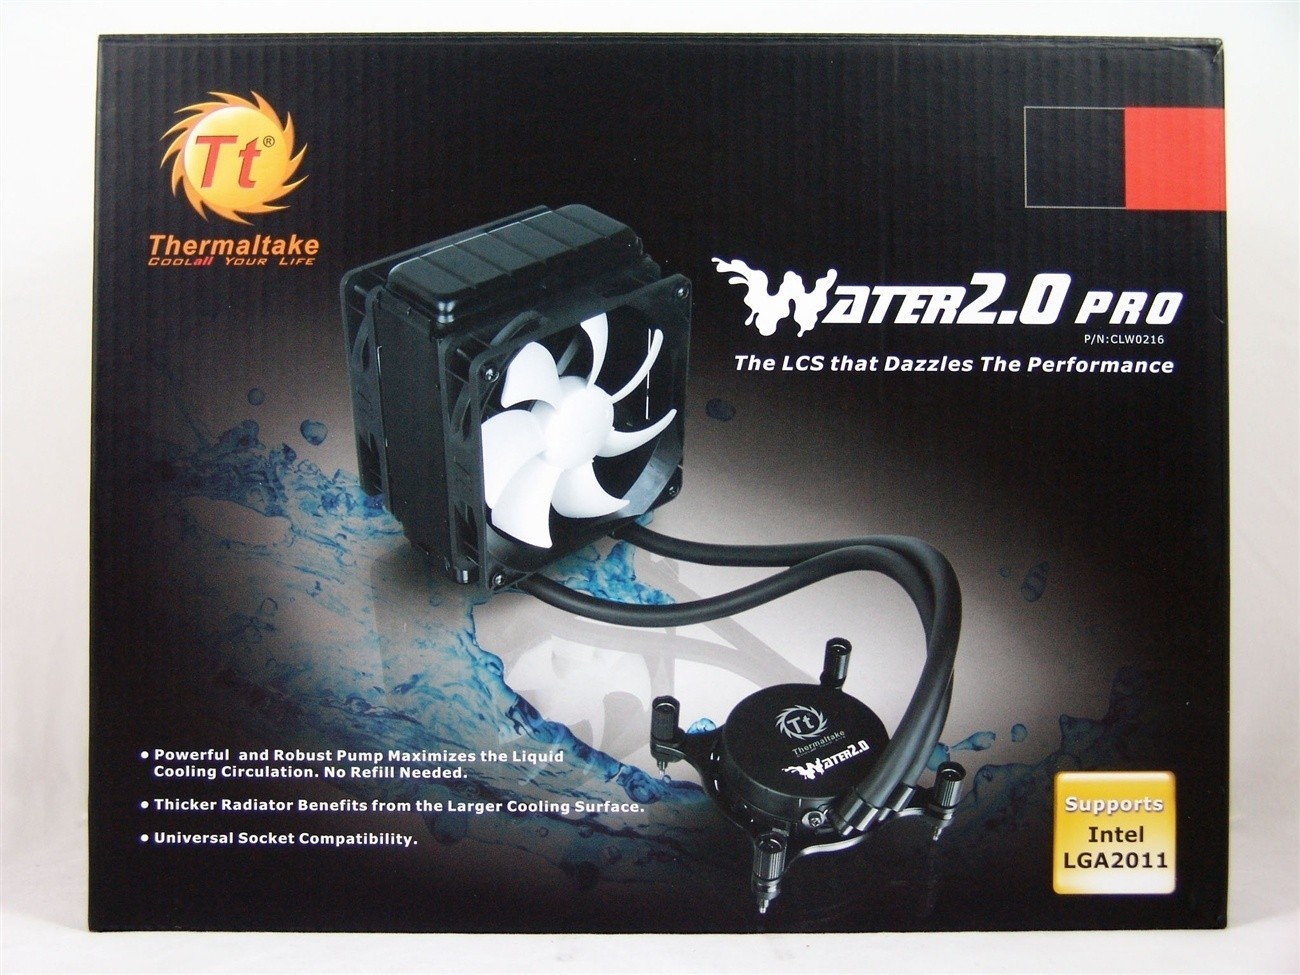 Thermaltake Water2.0 Pro AIO Liquid Cooler Review